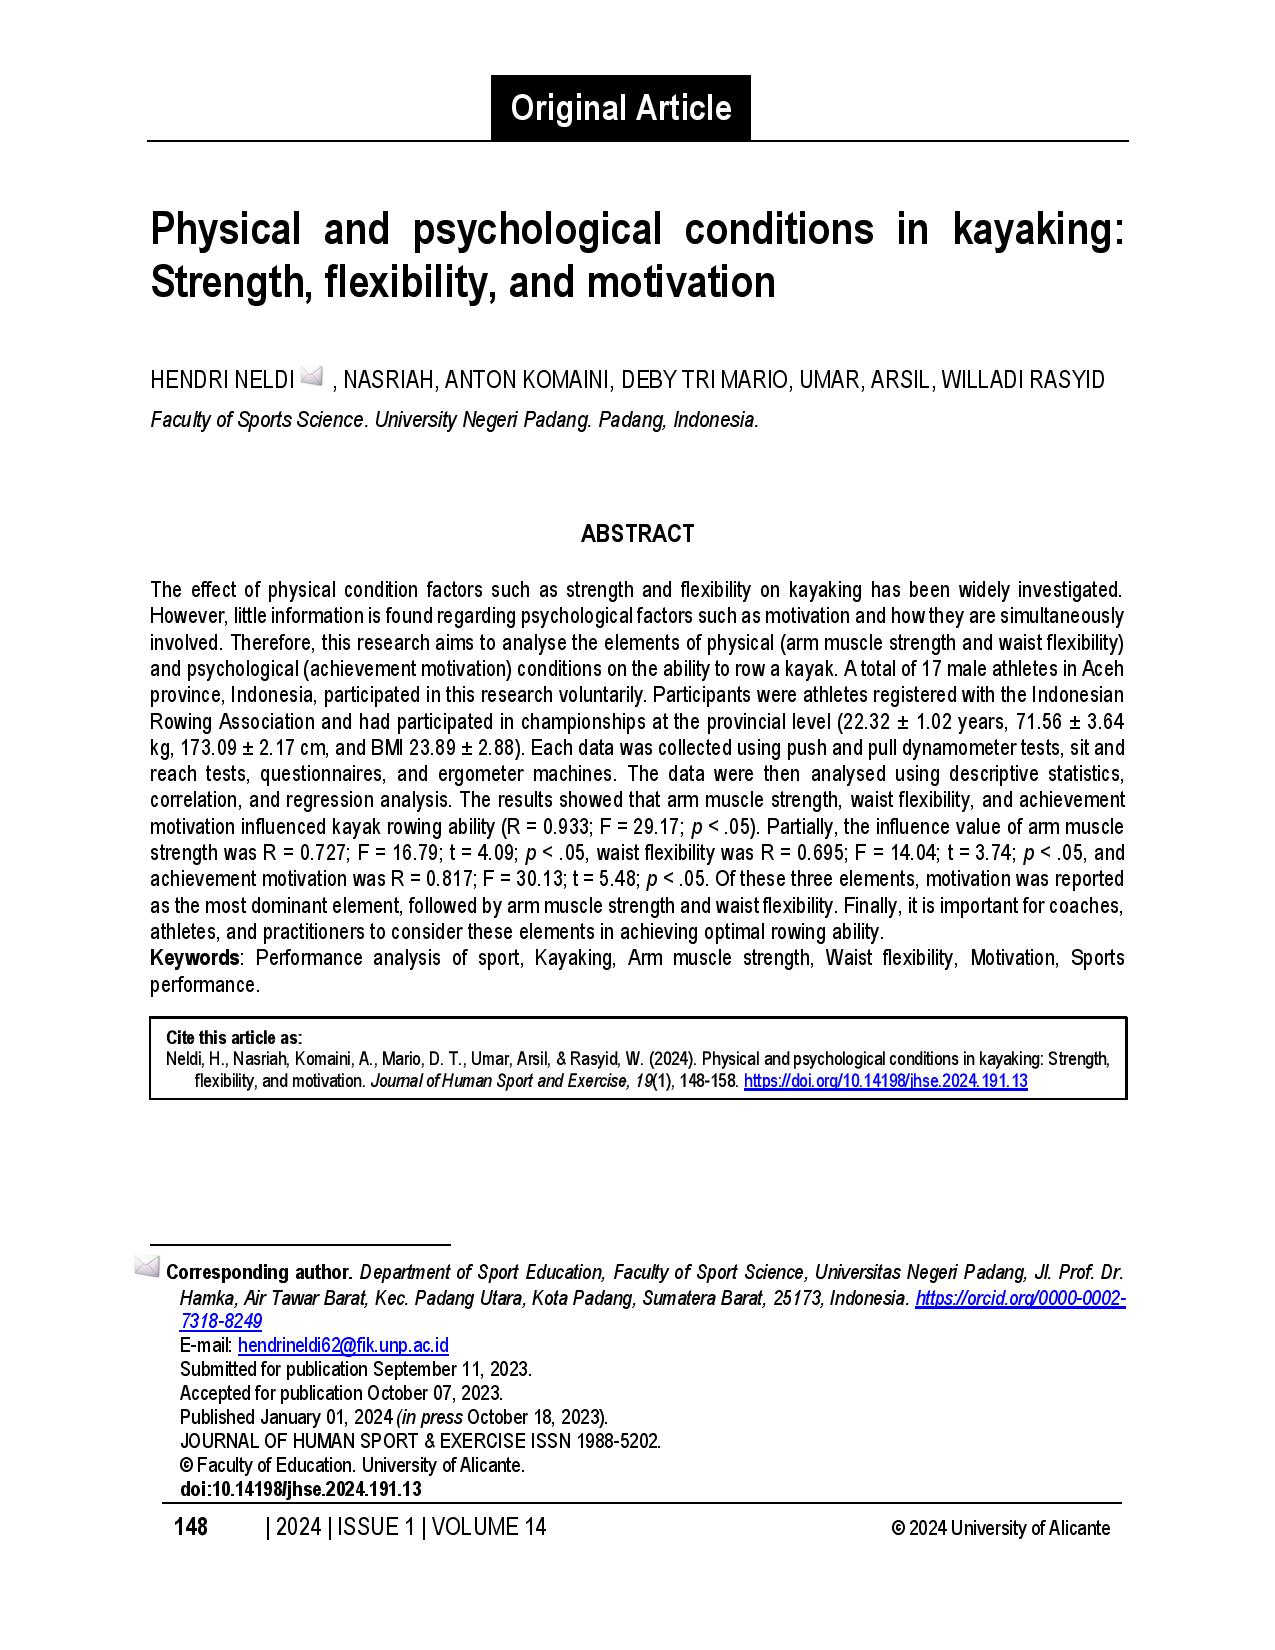 Physical and psychological conditions in kayaking: Strength, flexibility, and motivation